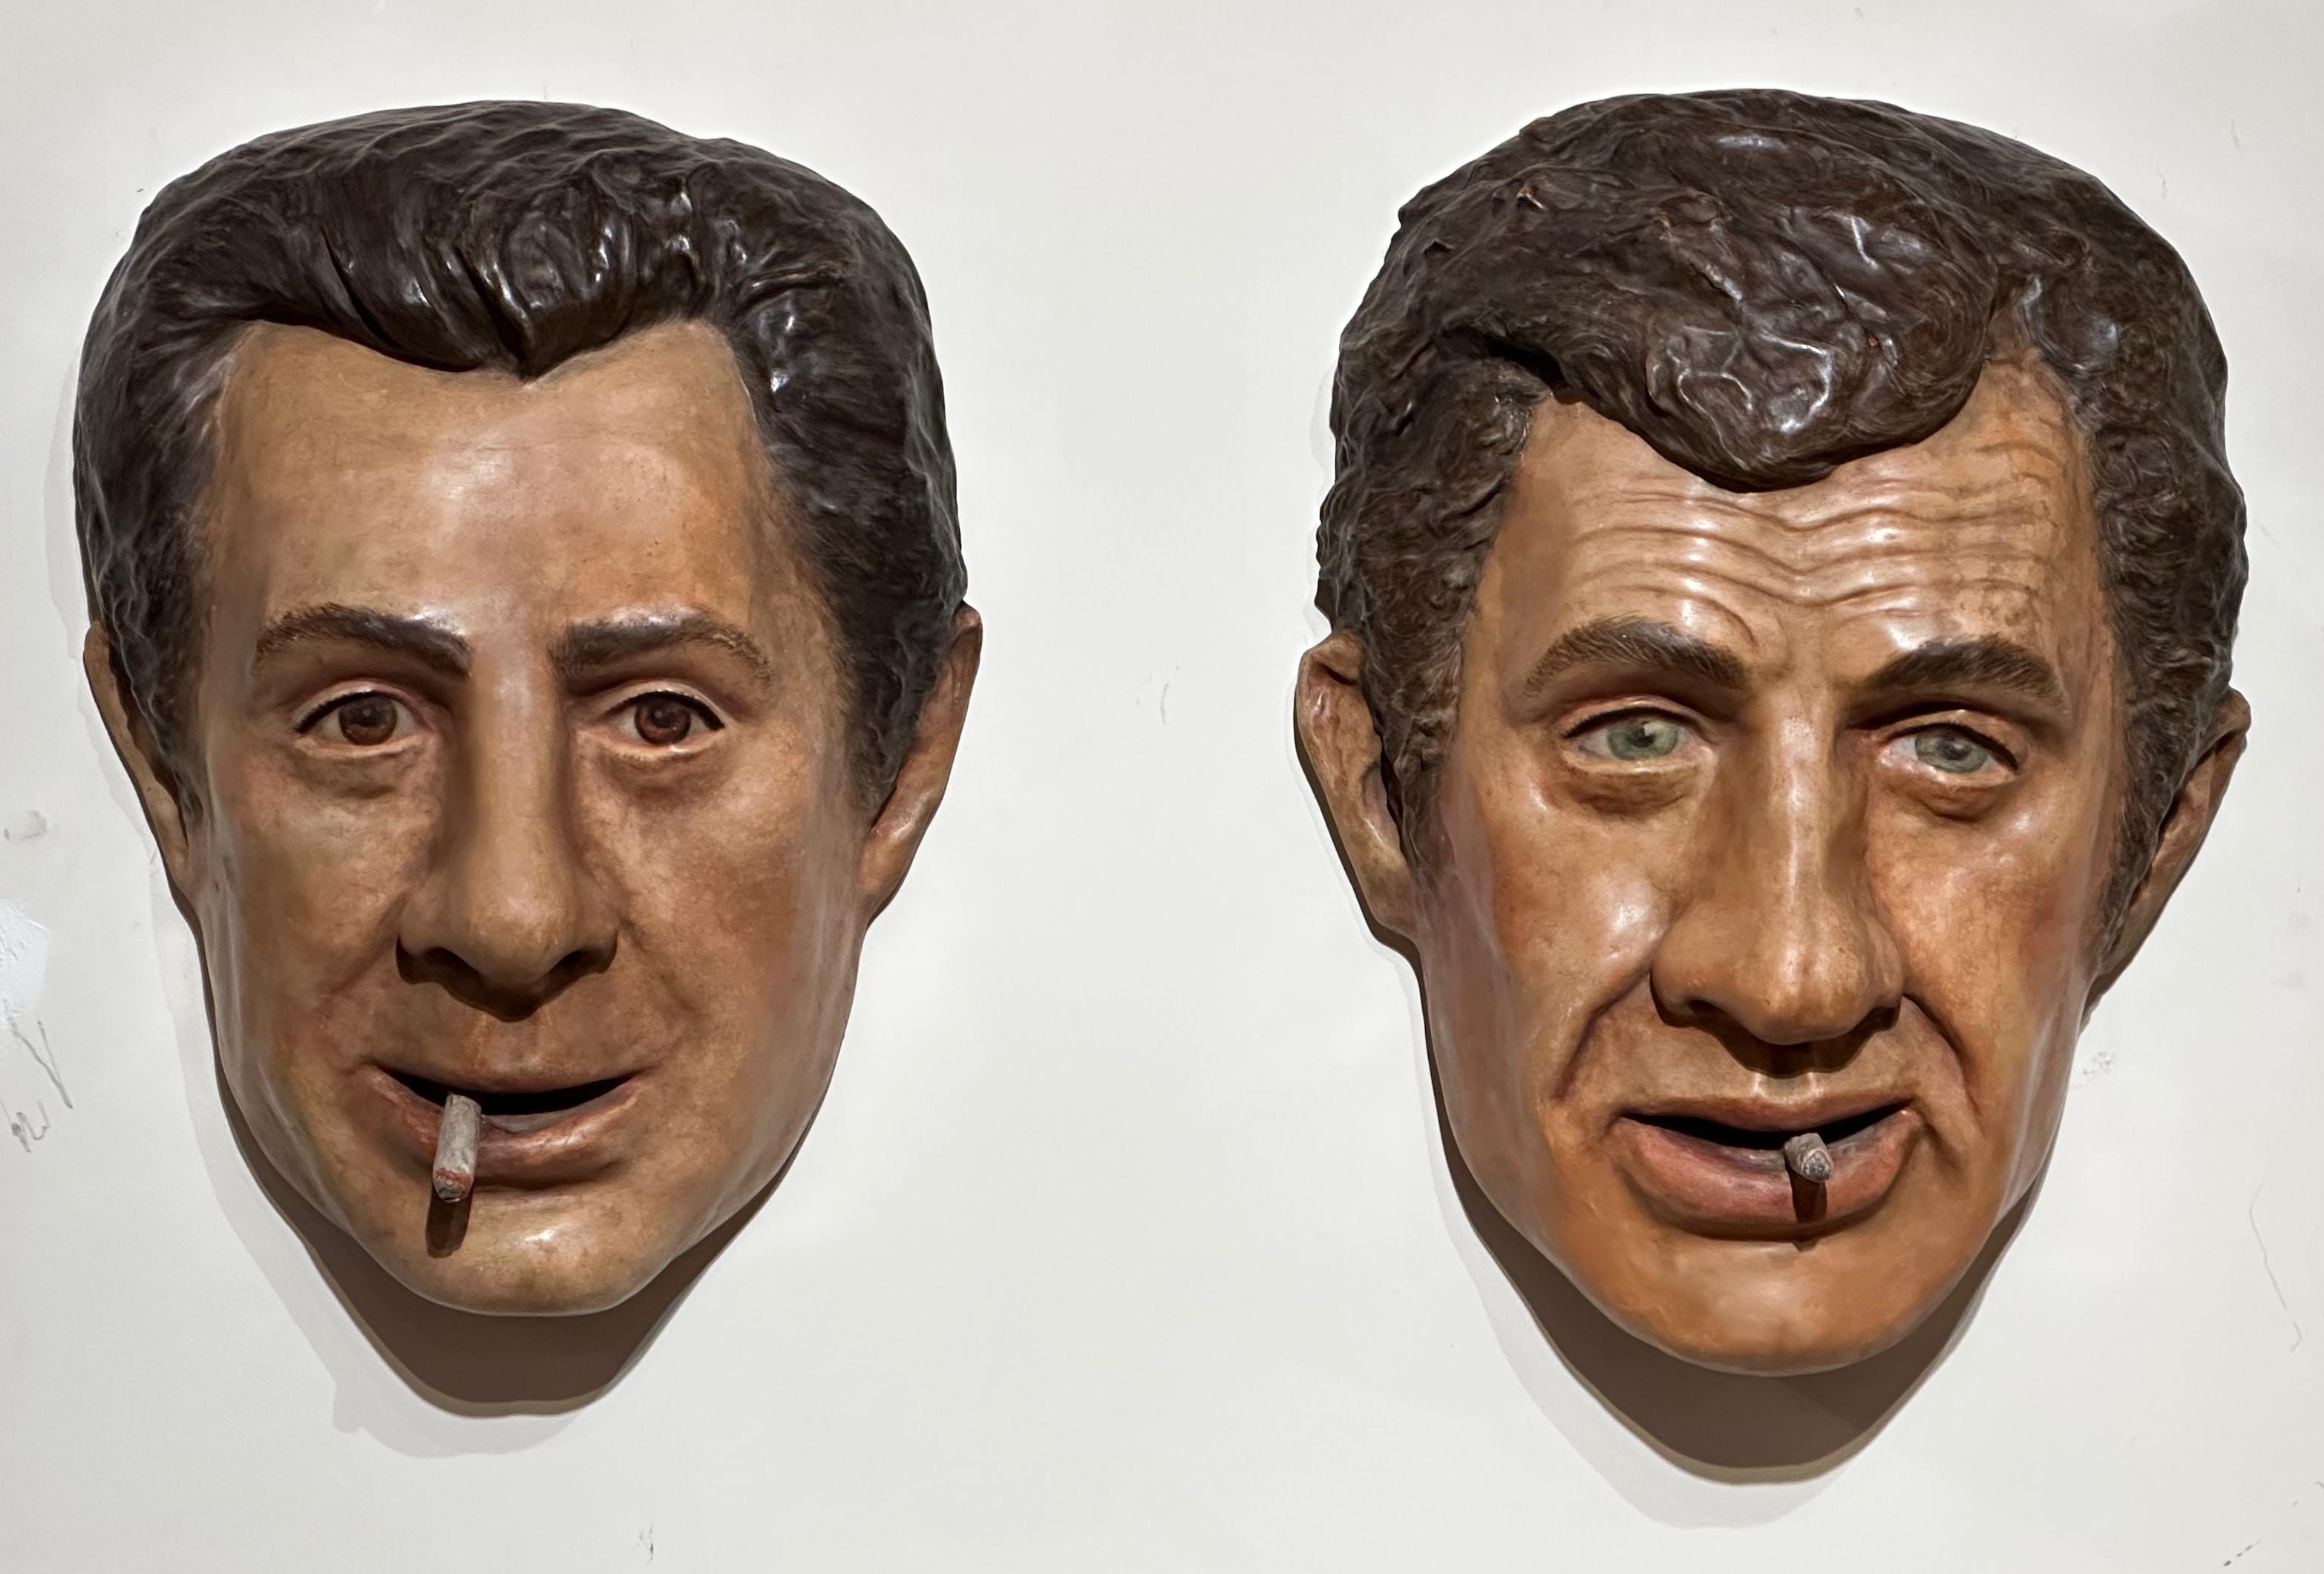 Original Hand Made Art Mask, a lifelike image of Itallion actor Marcello Mastroianni. This mask is very dimensional with great artistic details and a natural finish. There is a fascination for smoking at the time which came through not only in the